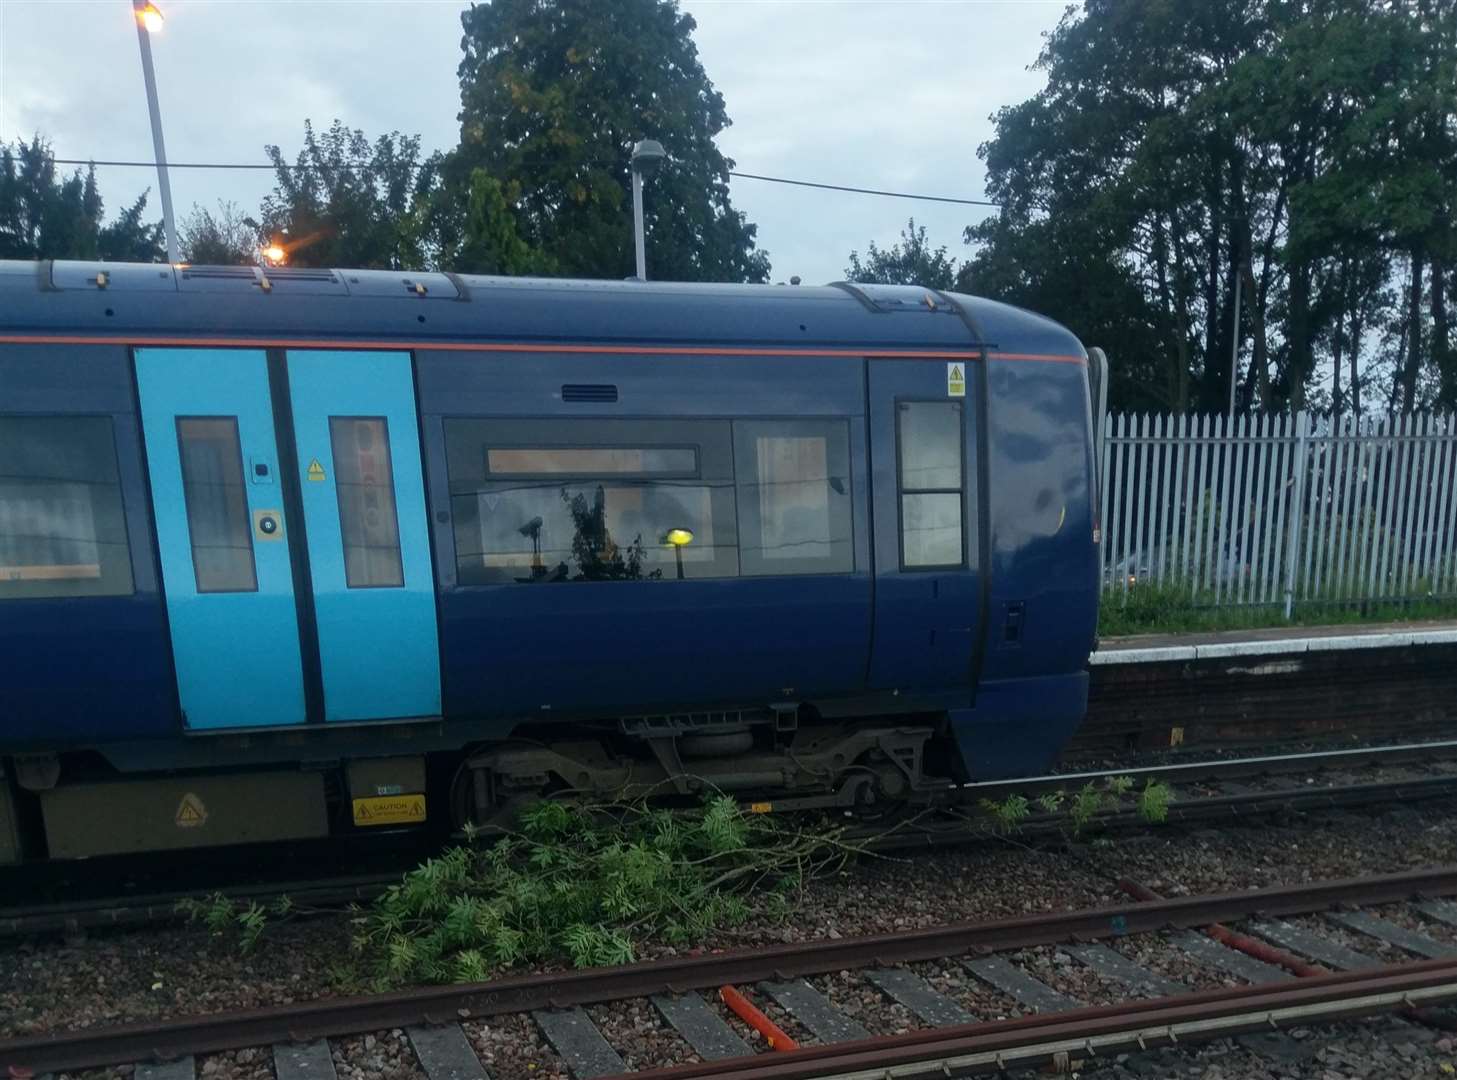 Lisa Kilby saw a tree stuck under a train at Maidstone East Station this morning (4325291)